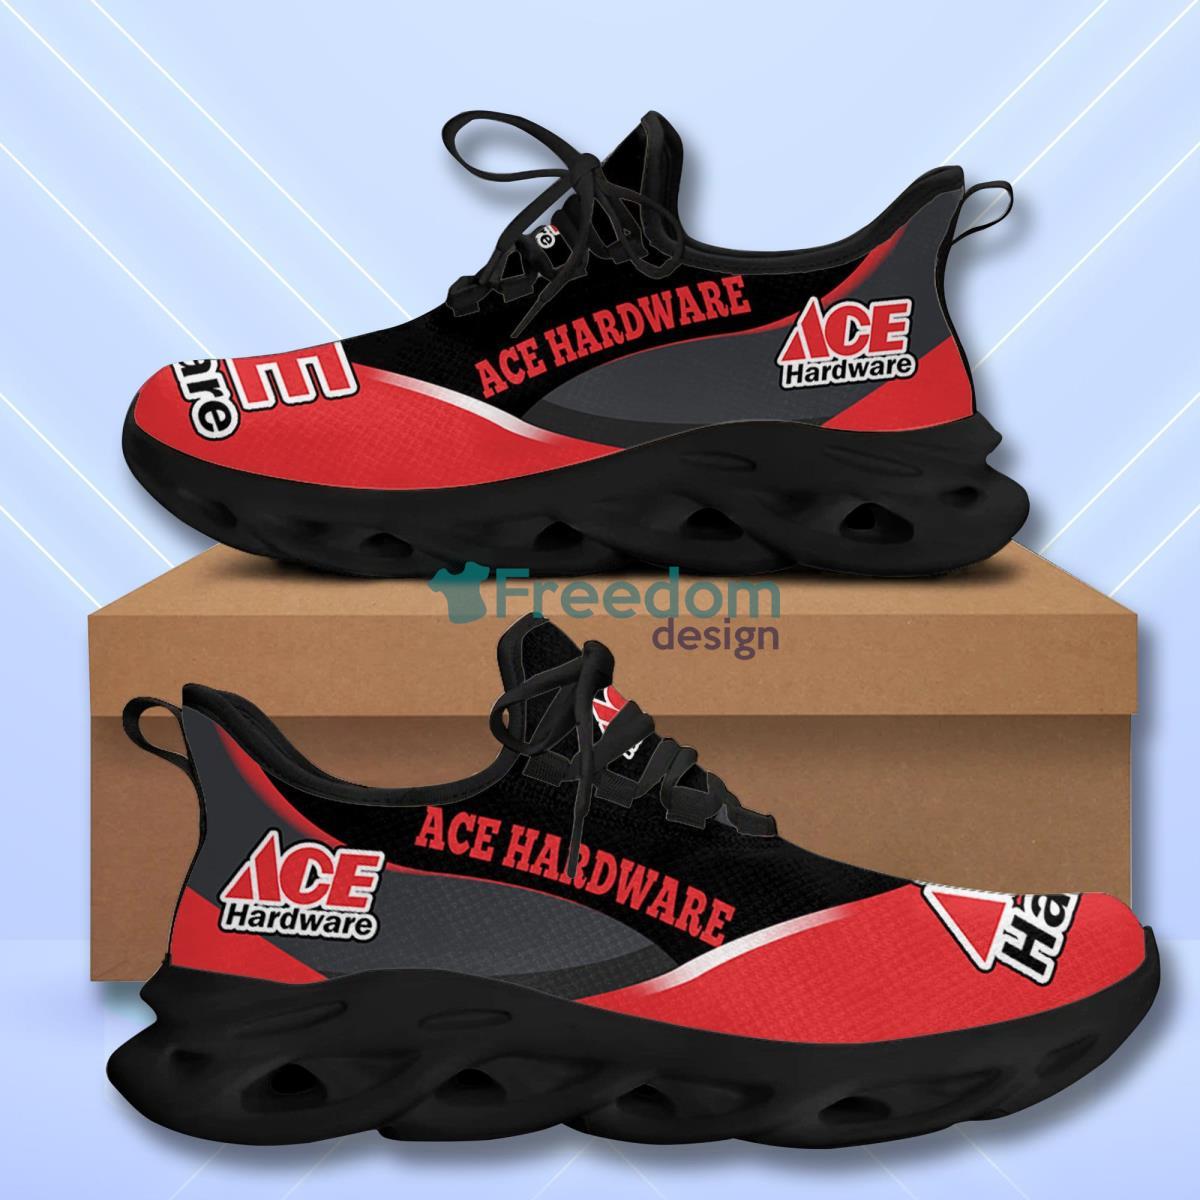 ACE Hardware Max Soul Shoes Hot Trending Special Gift For Men Women Product Photo 1